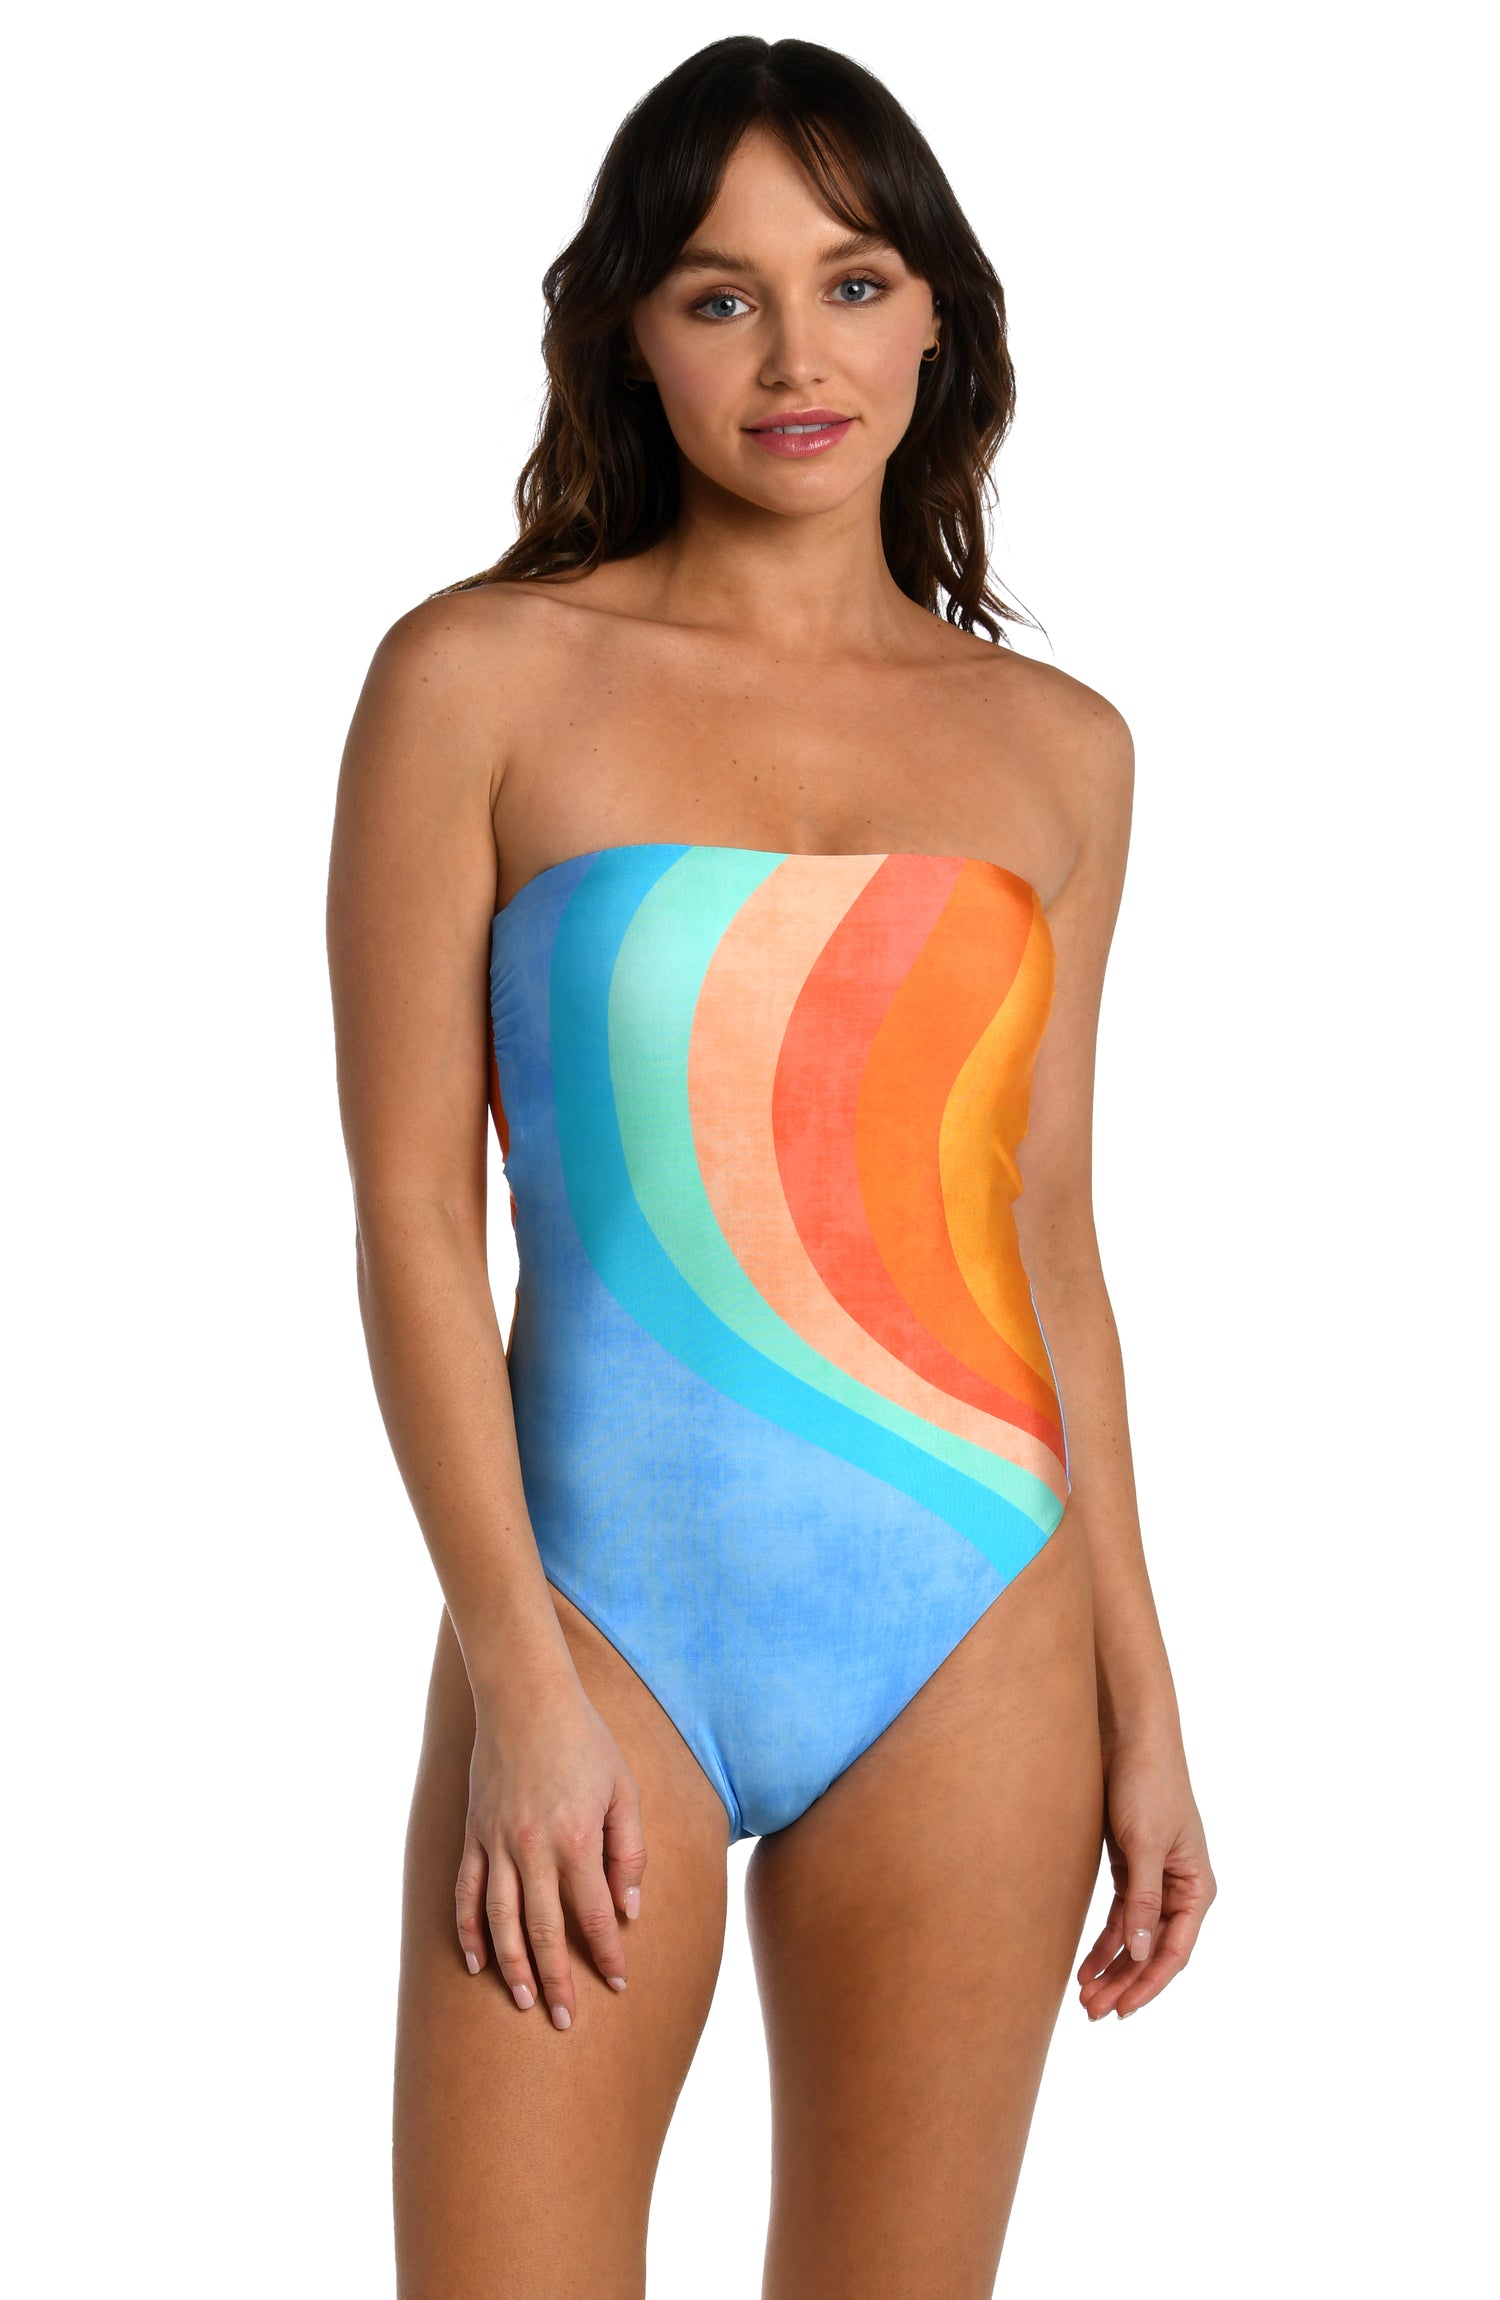 Model is wearing an orange and blue multicolored retro printed bandeu one piece swimsuit from our Mod Block collection.